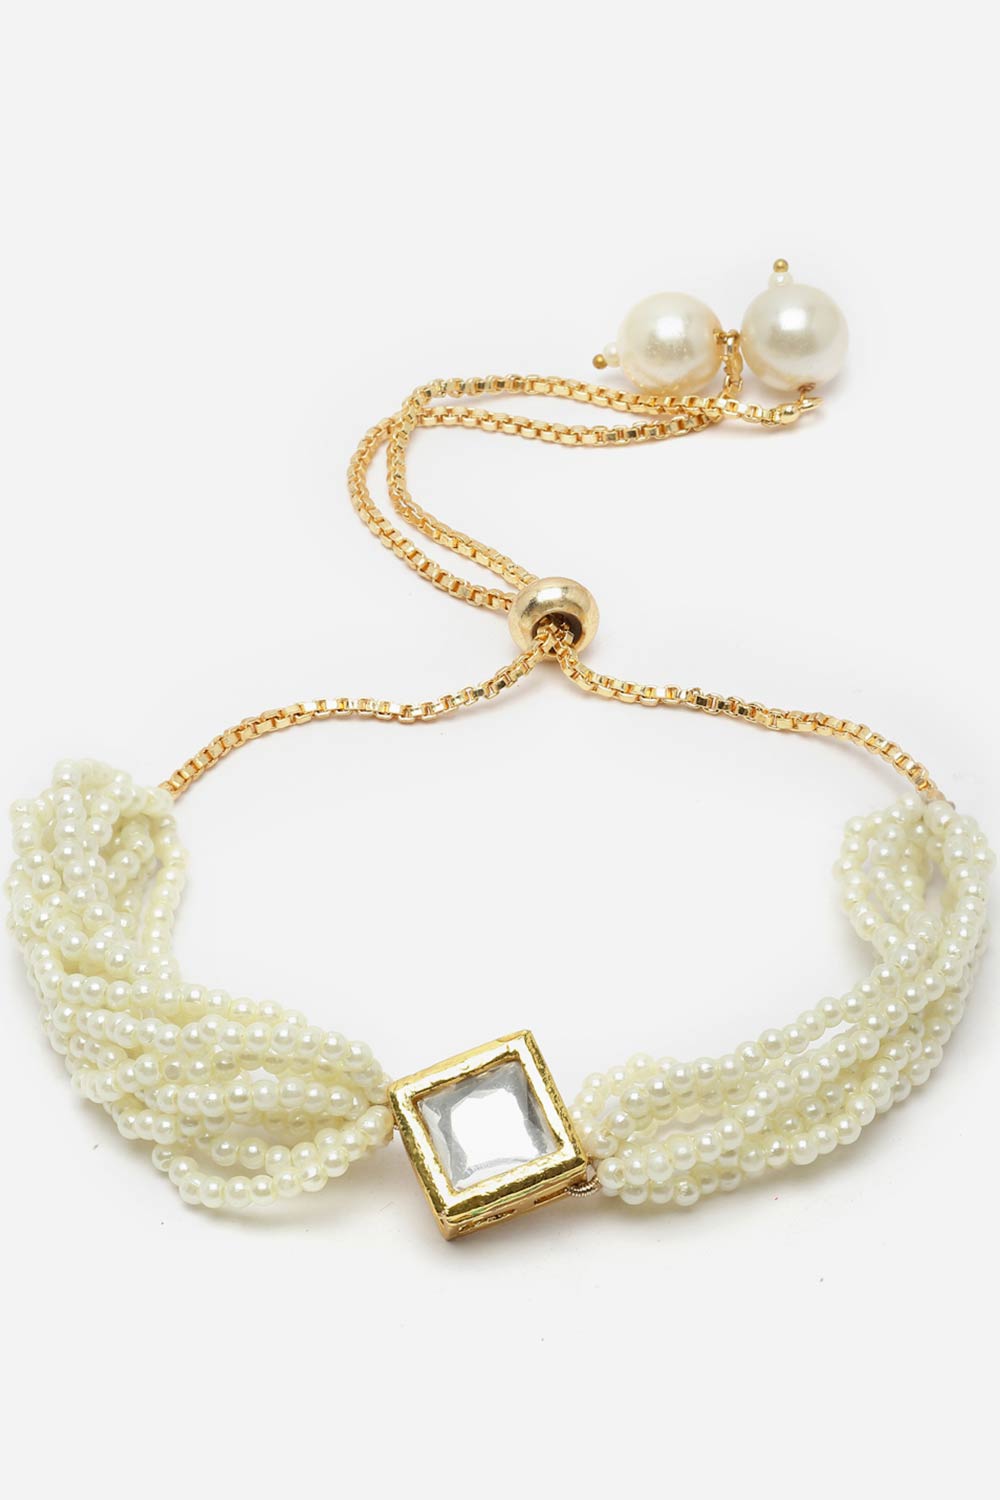 Gold And White Adjustable Bracelet With Kundan And Pearls